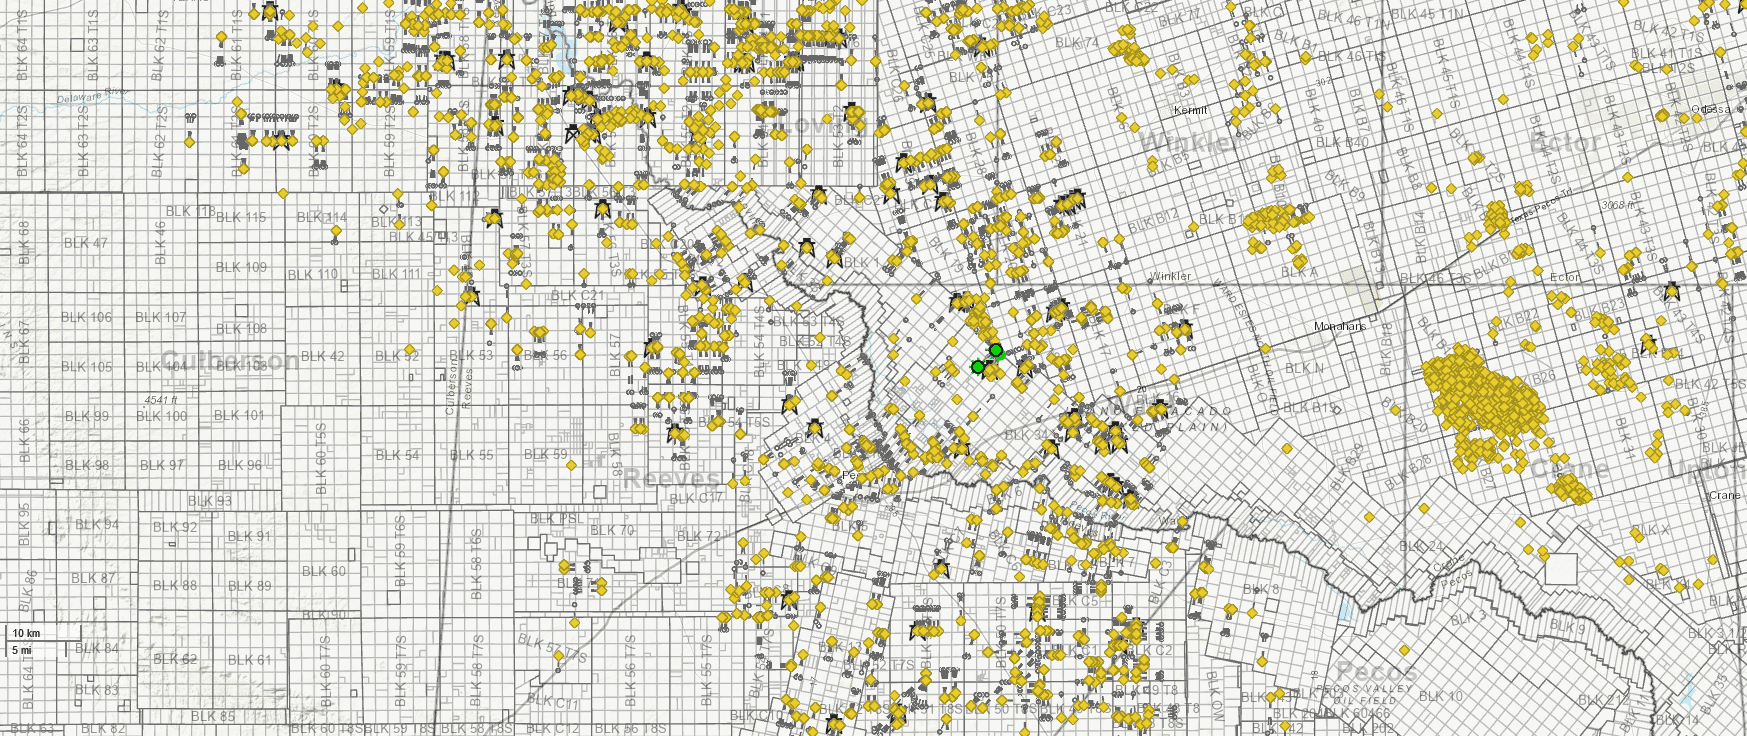 DI Map - Zoomed Out